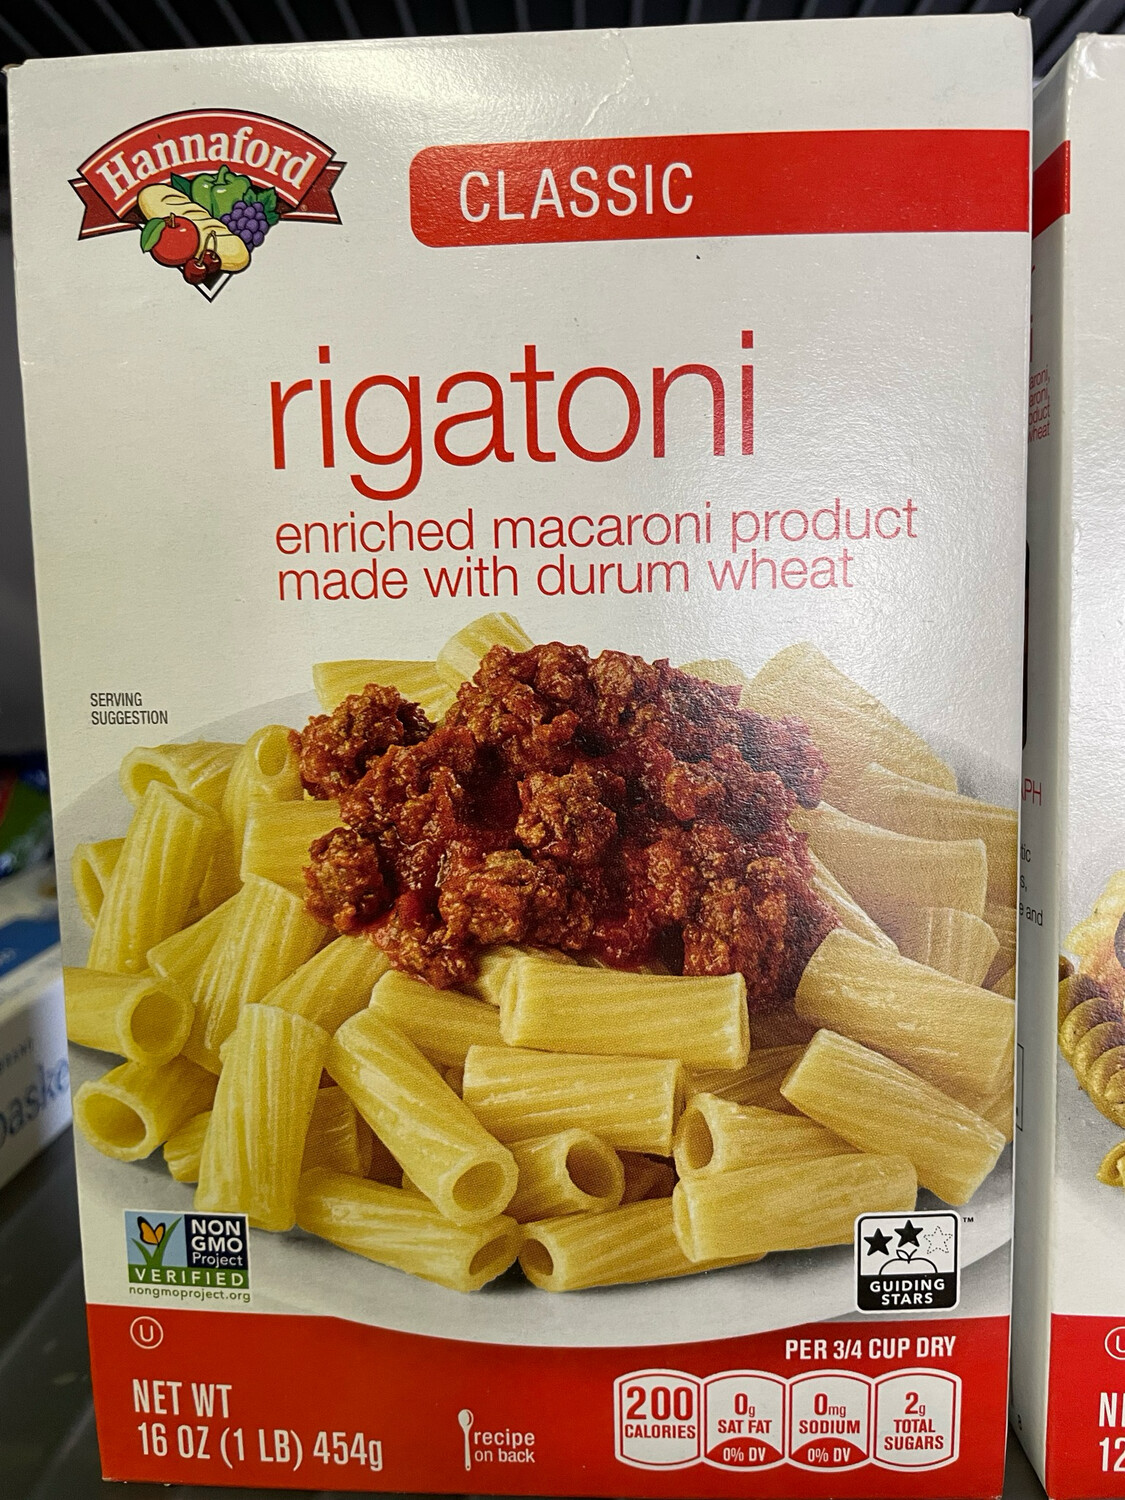 Assorted Pasta
(*LIMIT 1 per household*)